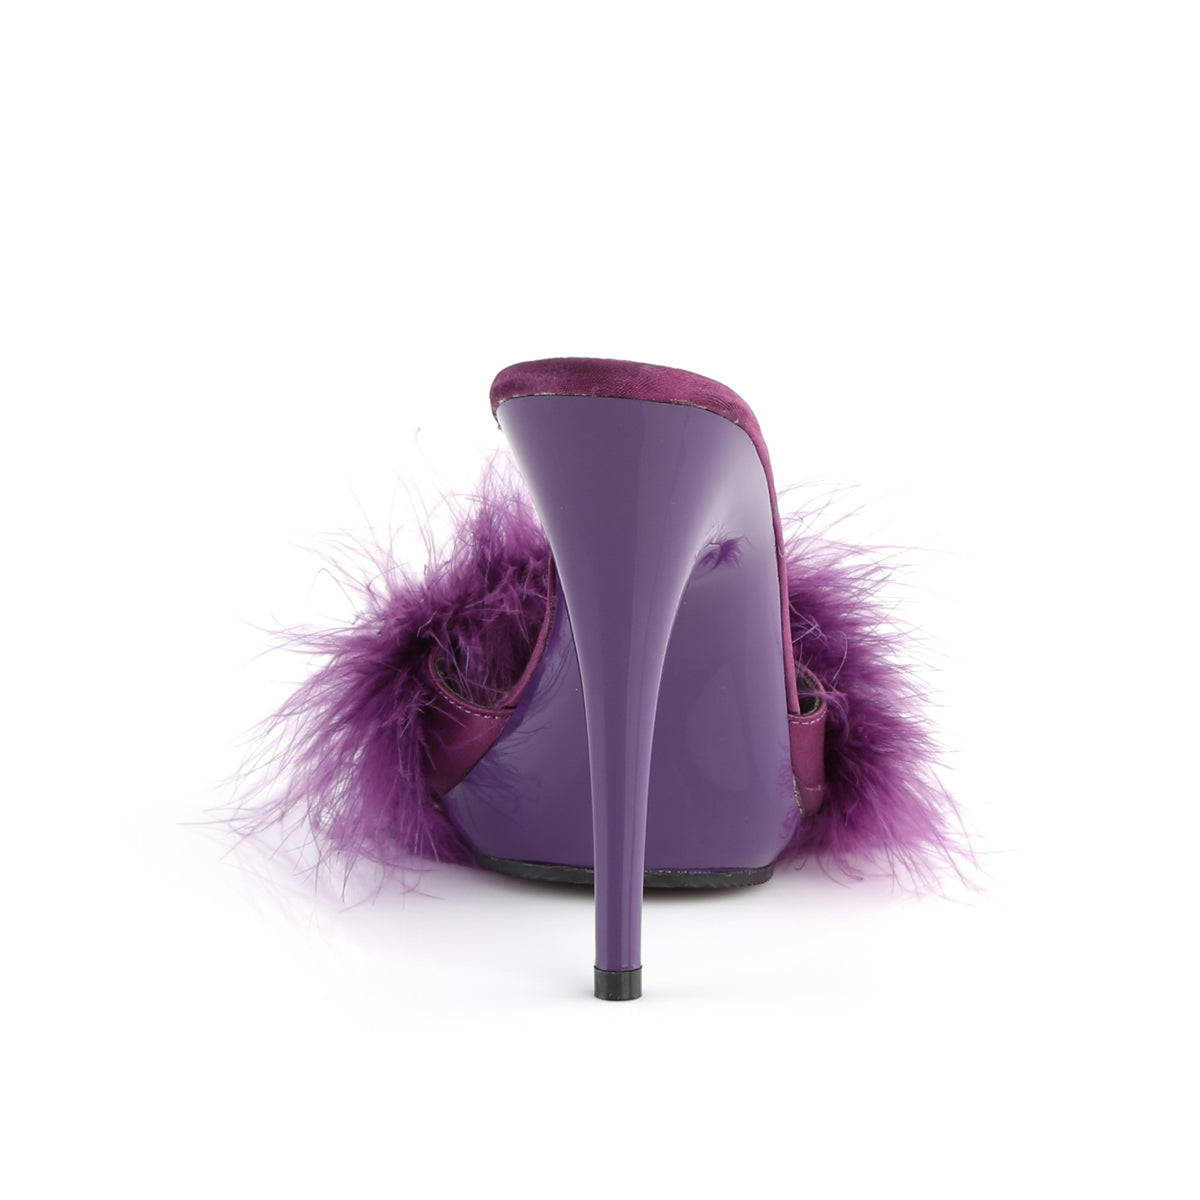 POISE-501F Fabulicious 5 Inch Heel Purple Sexy Shoes-Fabulicious- Sexy Shoes Fetish Footwear